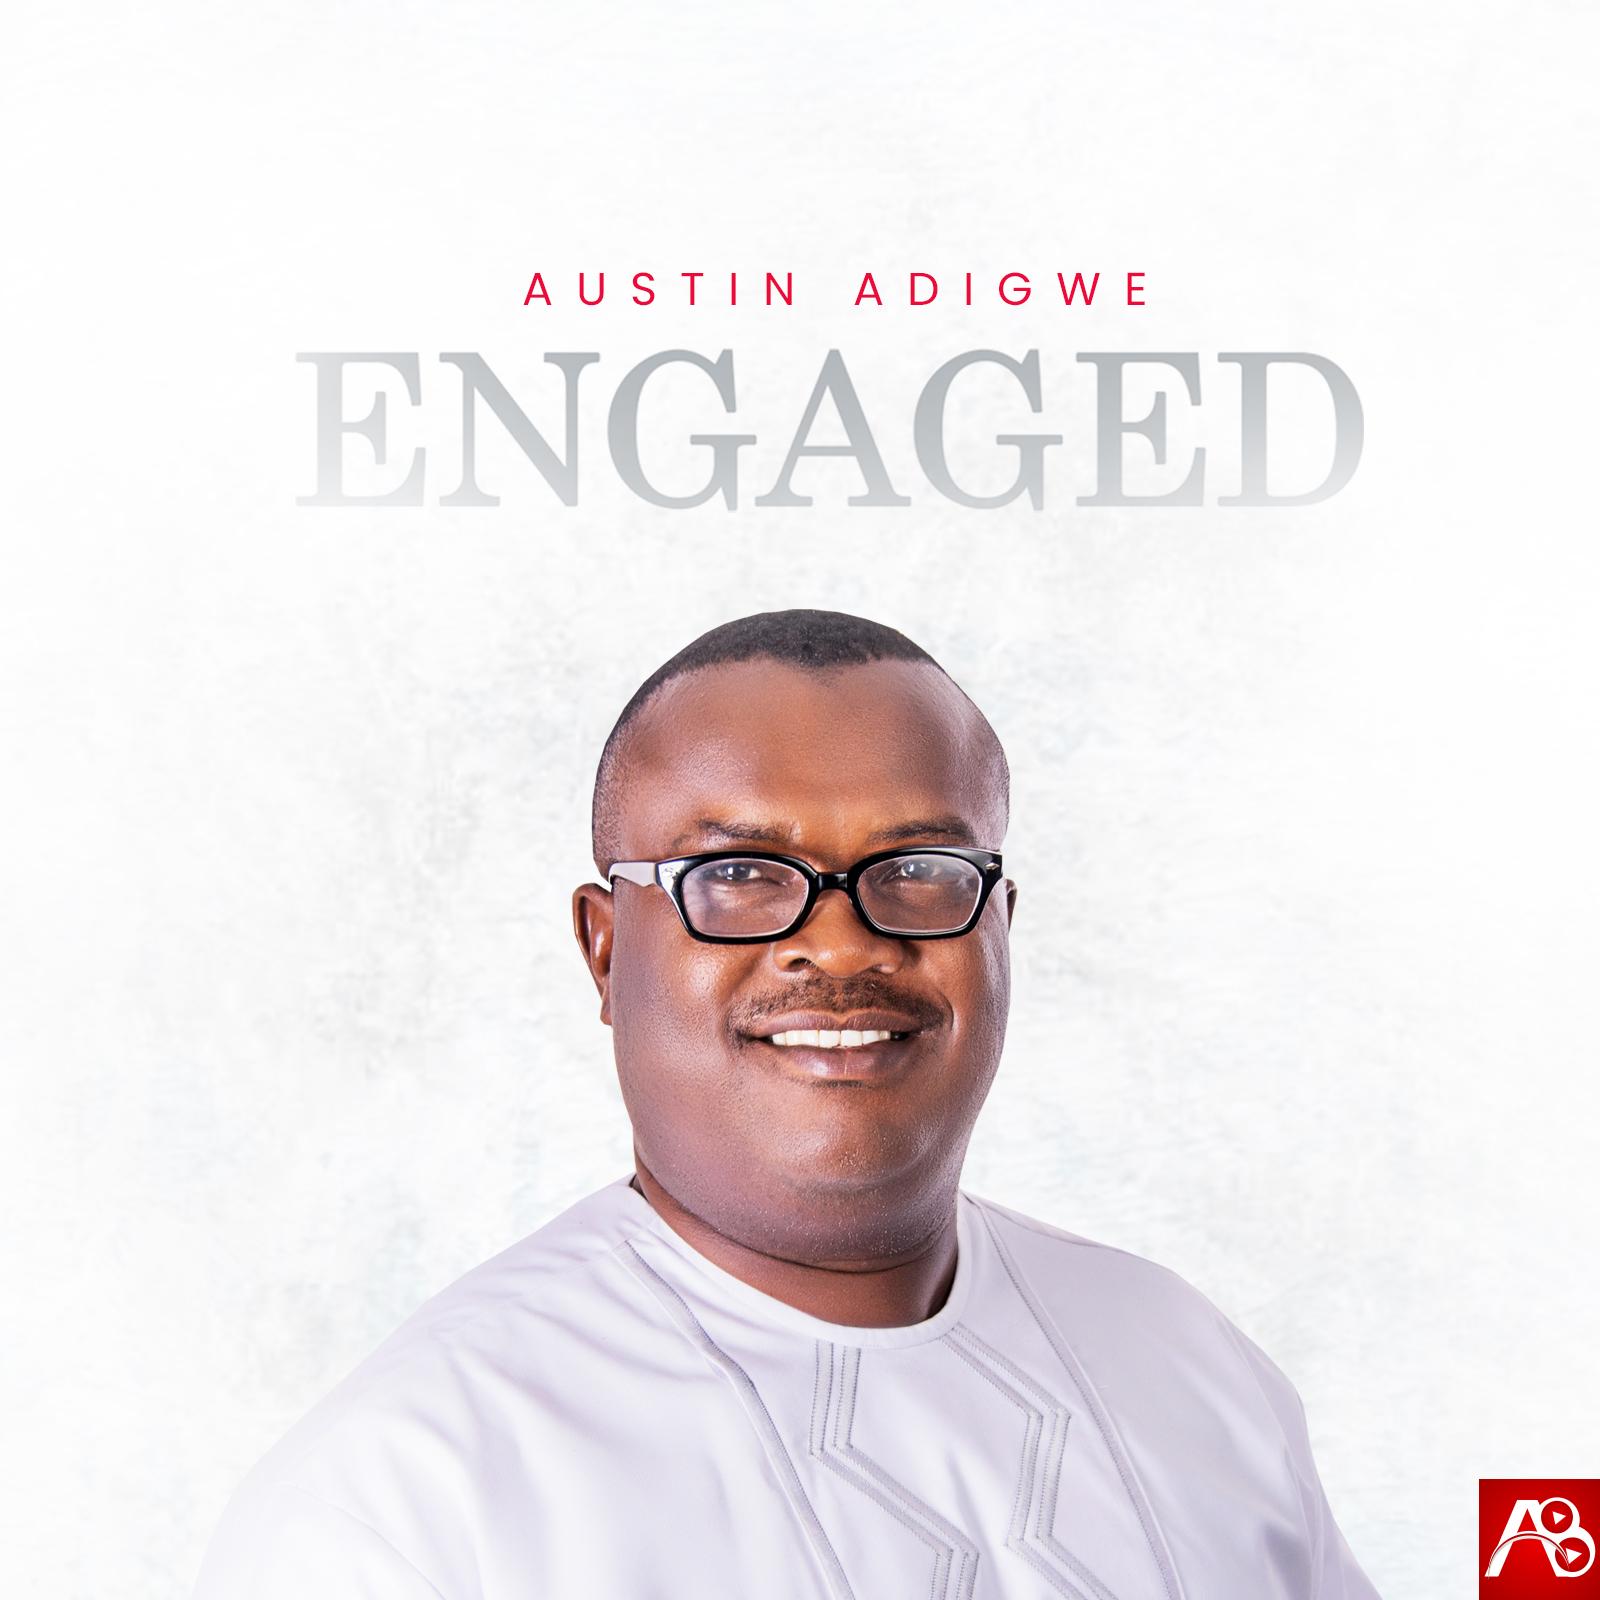 [Video + Music] Engaged By Austin Adigwe [Prod. by Sunny Pee]